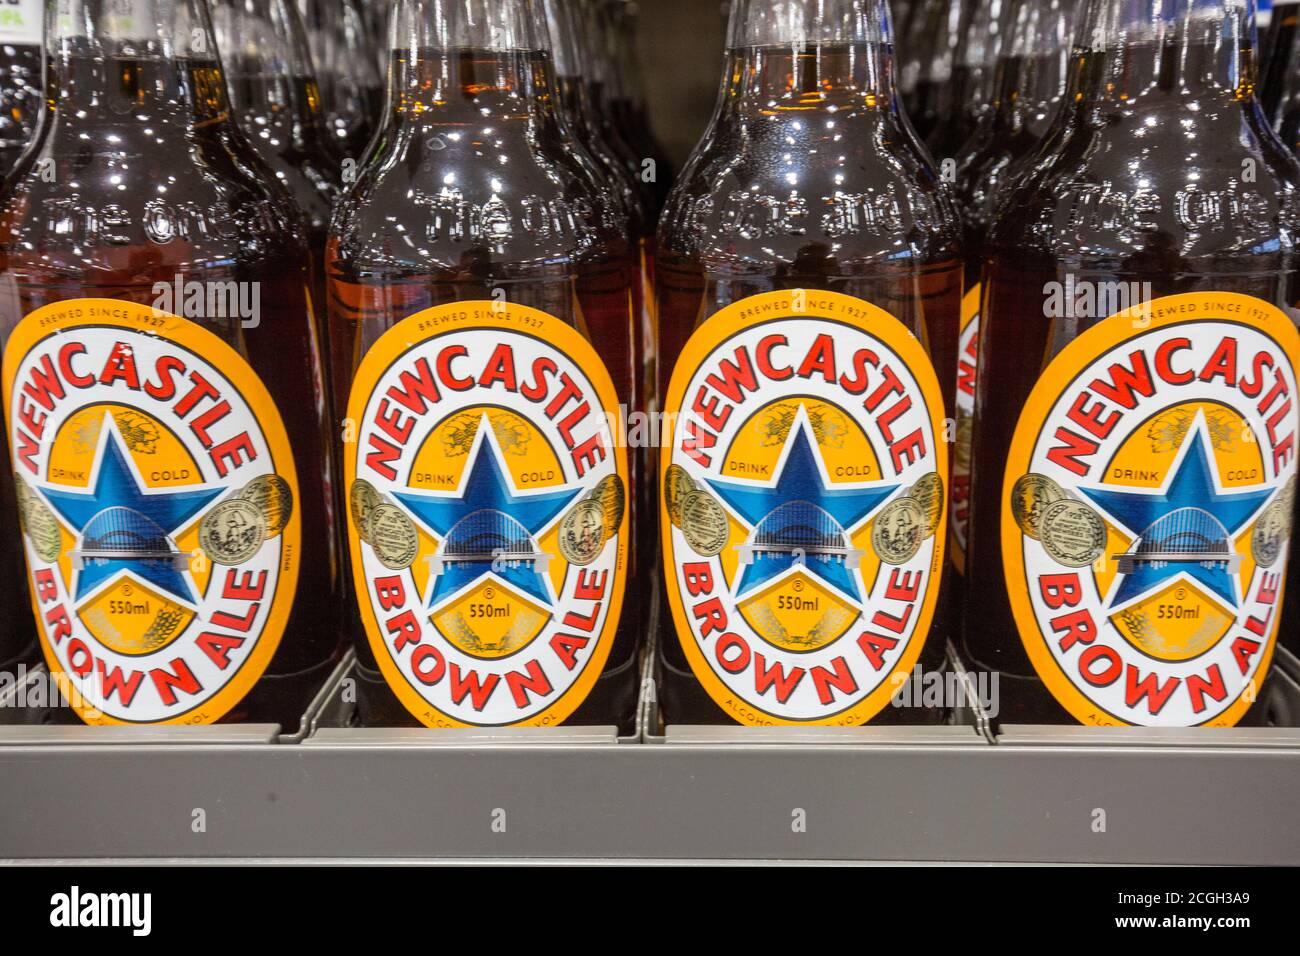 Newcastle Brown Ale High Resolution Stock Photography and Images - Alamy